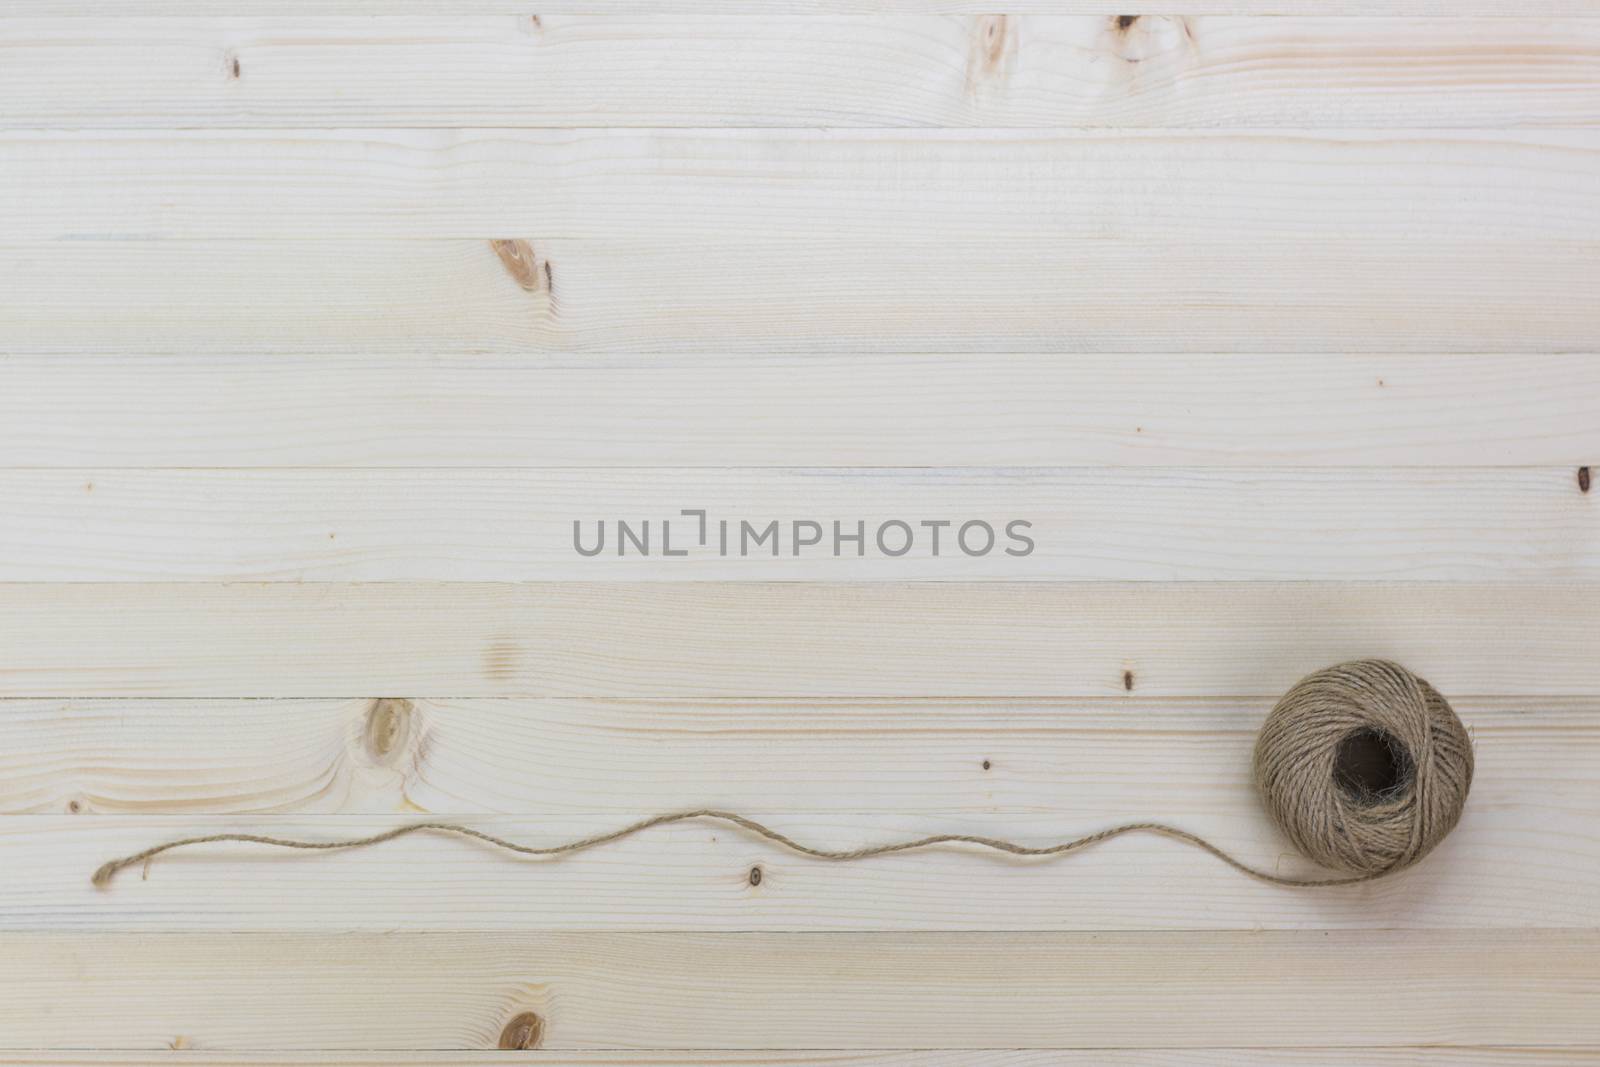 Hemp rope roll placed on a pine floor background. by Eungsuwat